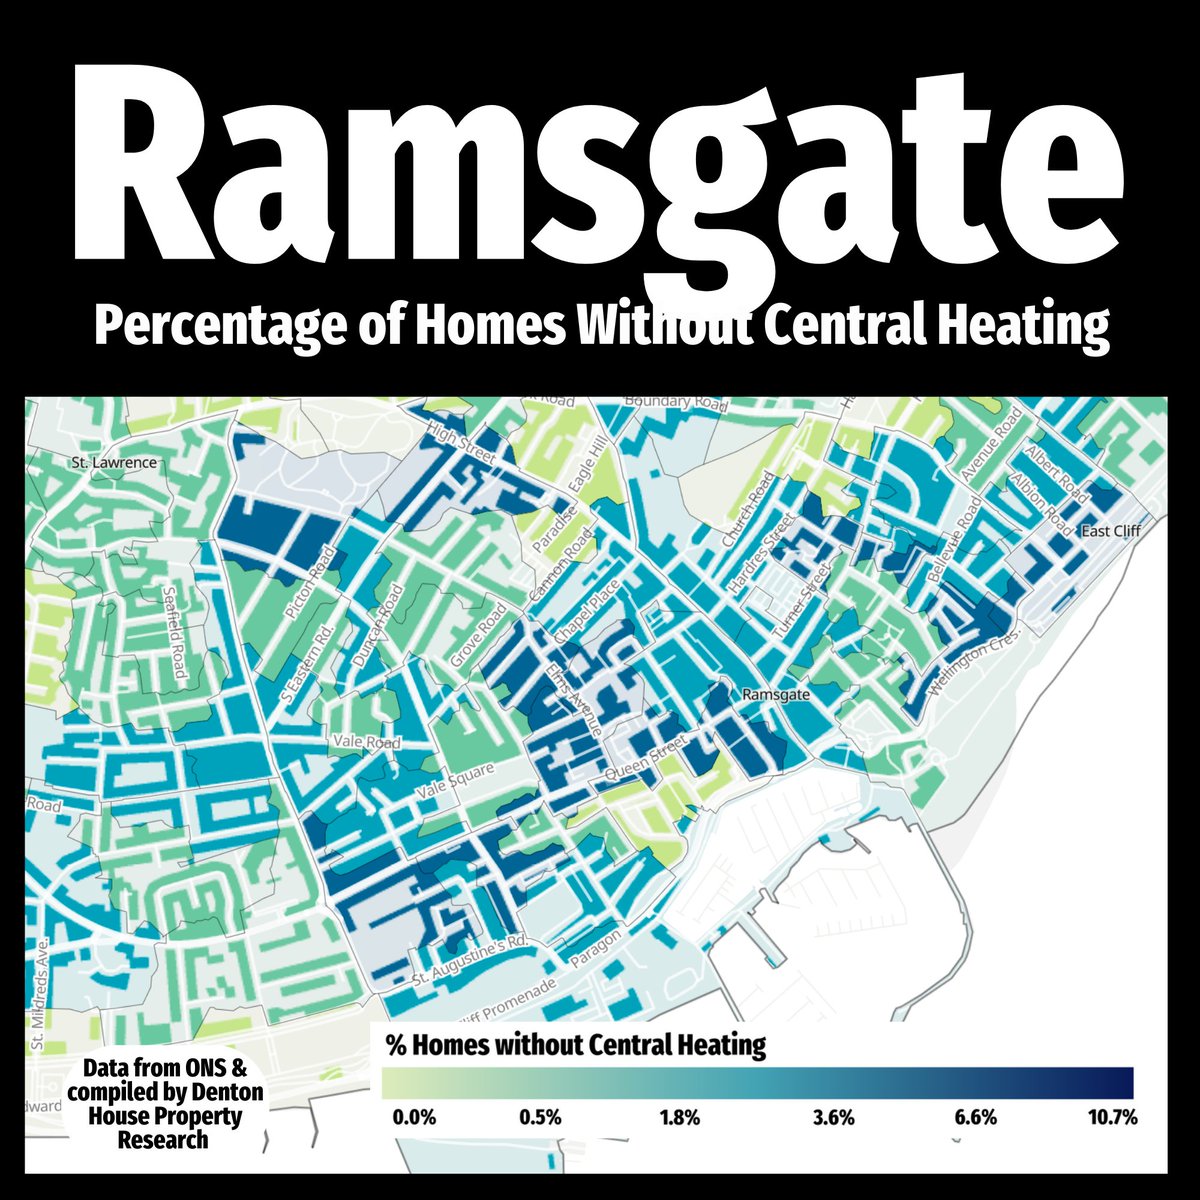 🔥❄️ Thanet's Heating Divide Exposed! Check out new heatmaps revealing the stark contrast between chilly and cosy areas across Margate, Broadstairs, and Ramsgate. 🌡️
👉 bit.ly/4b8linr 
#ThanetHeating #PropertyMarket #HeatingDivide #UKHomes